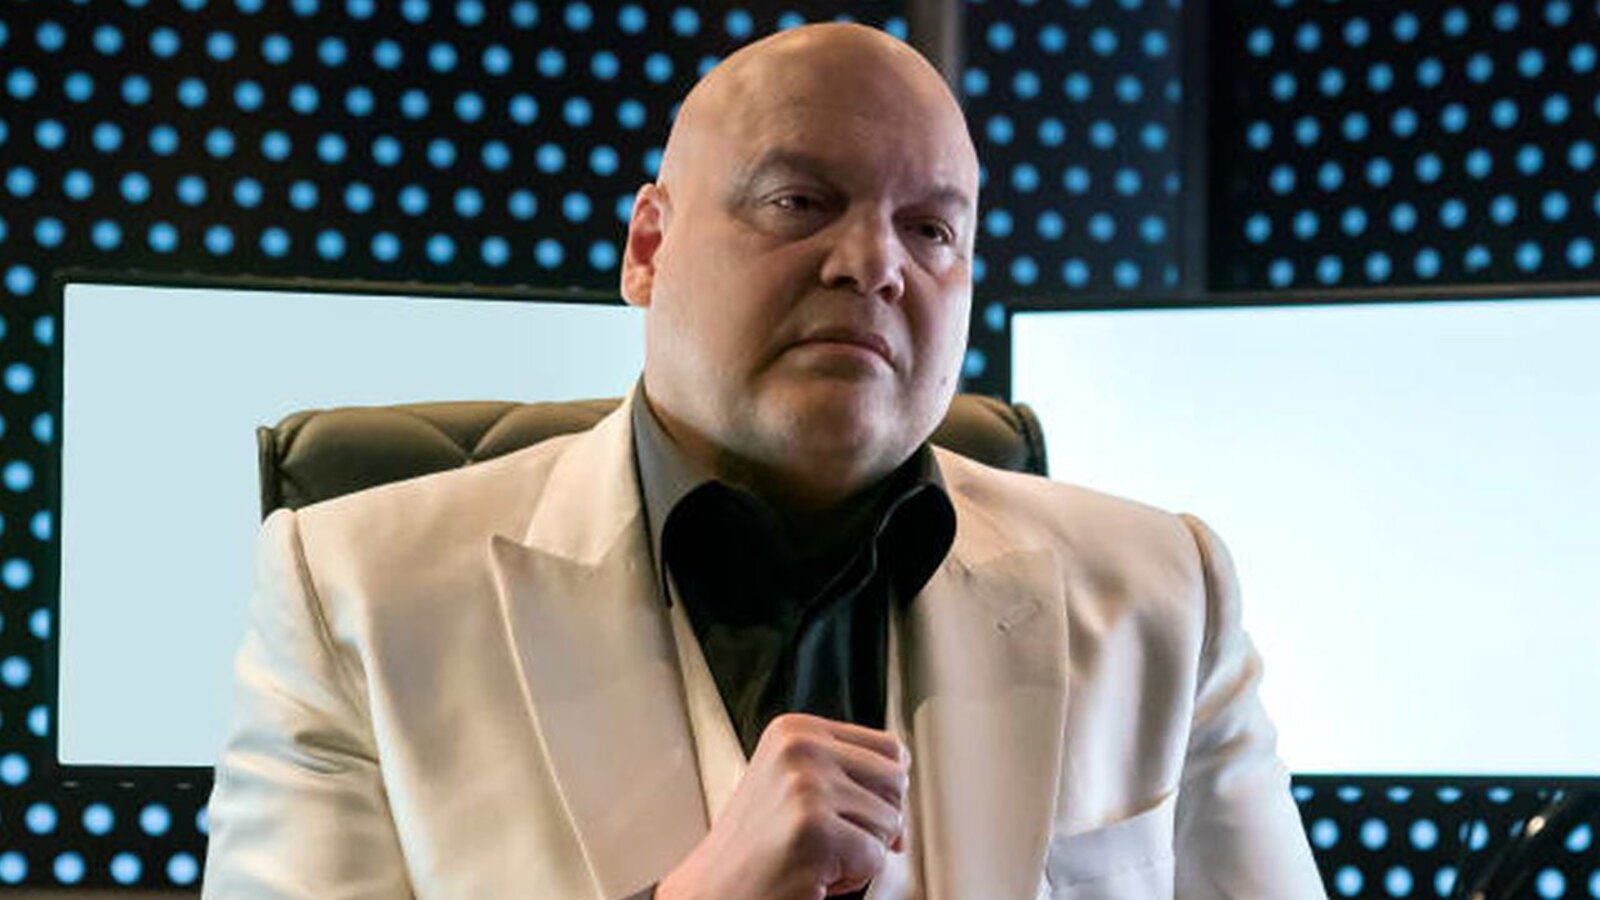 Will Daredevil: Born Again rework the Kingpin's origin story?  The new photos from the set would suggest it